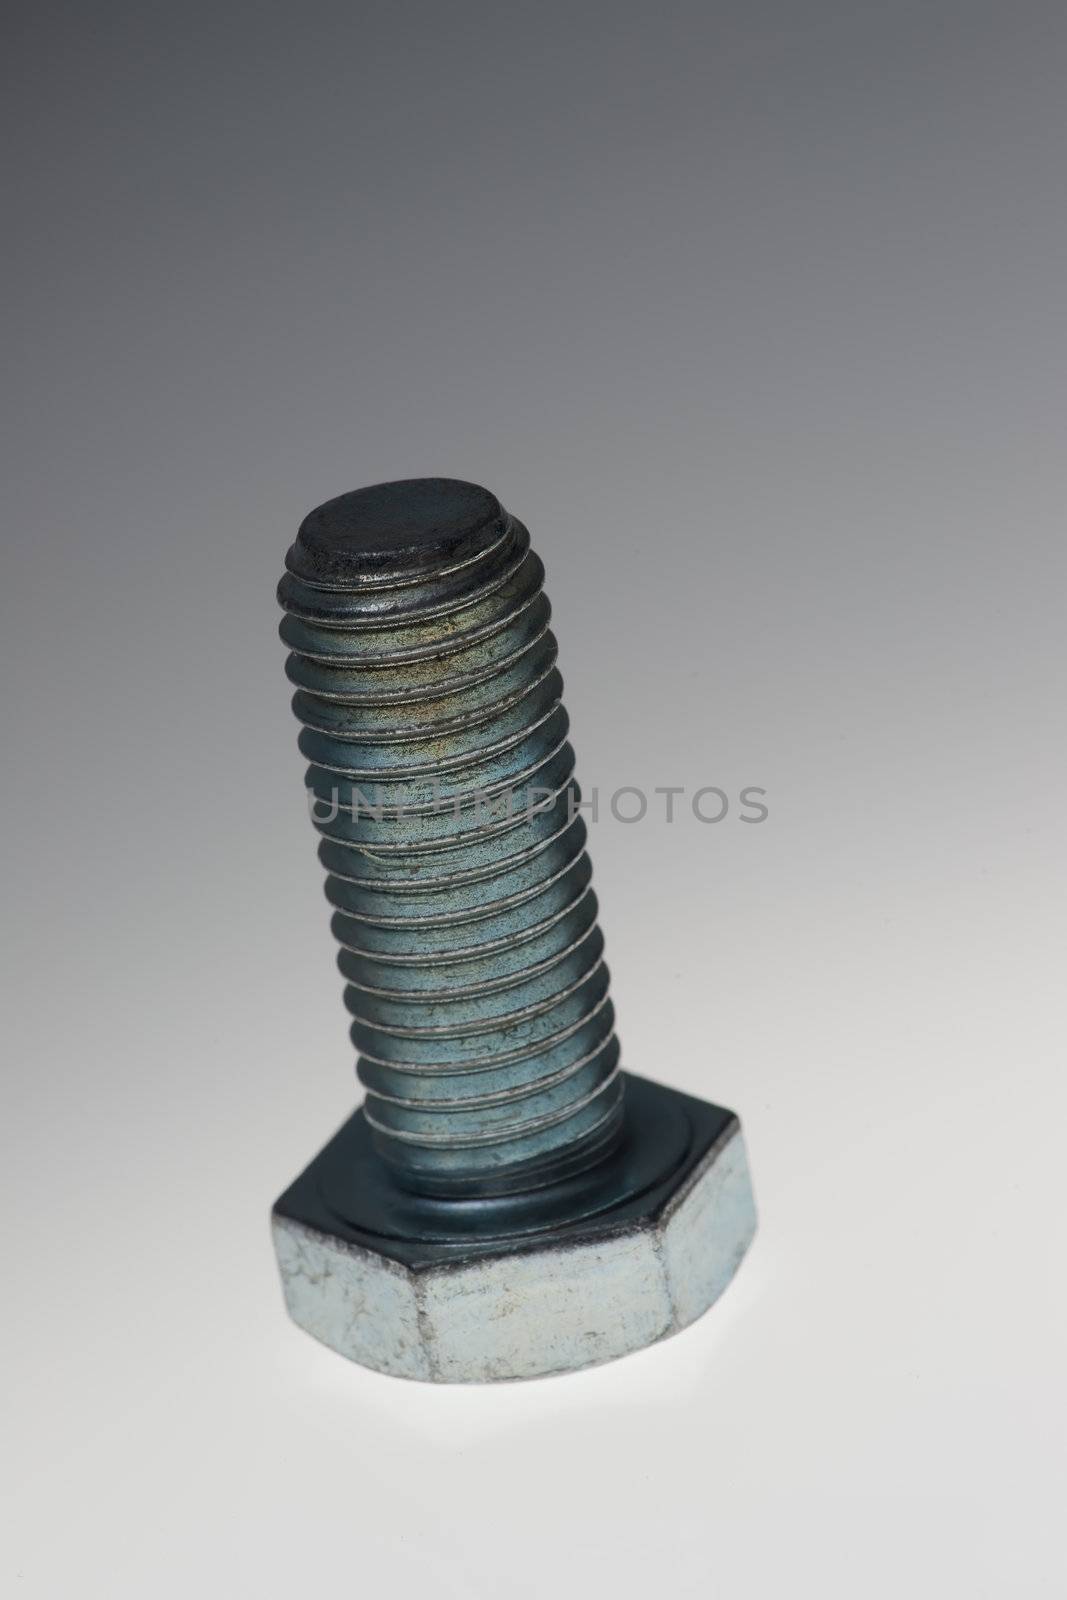 Extreme close up of a bolt over white grey background